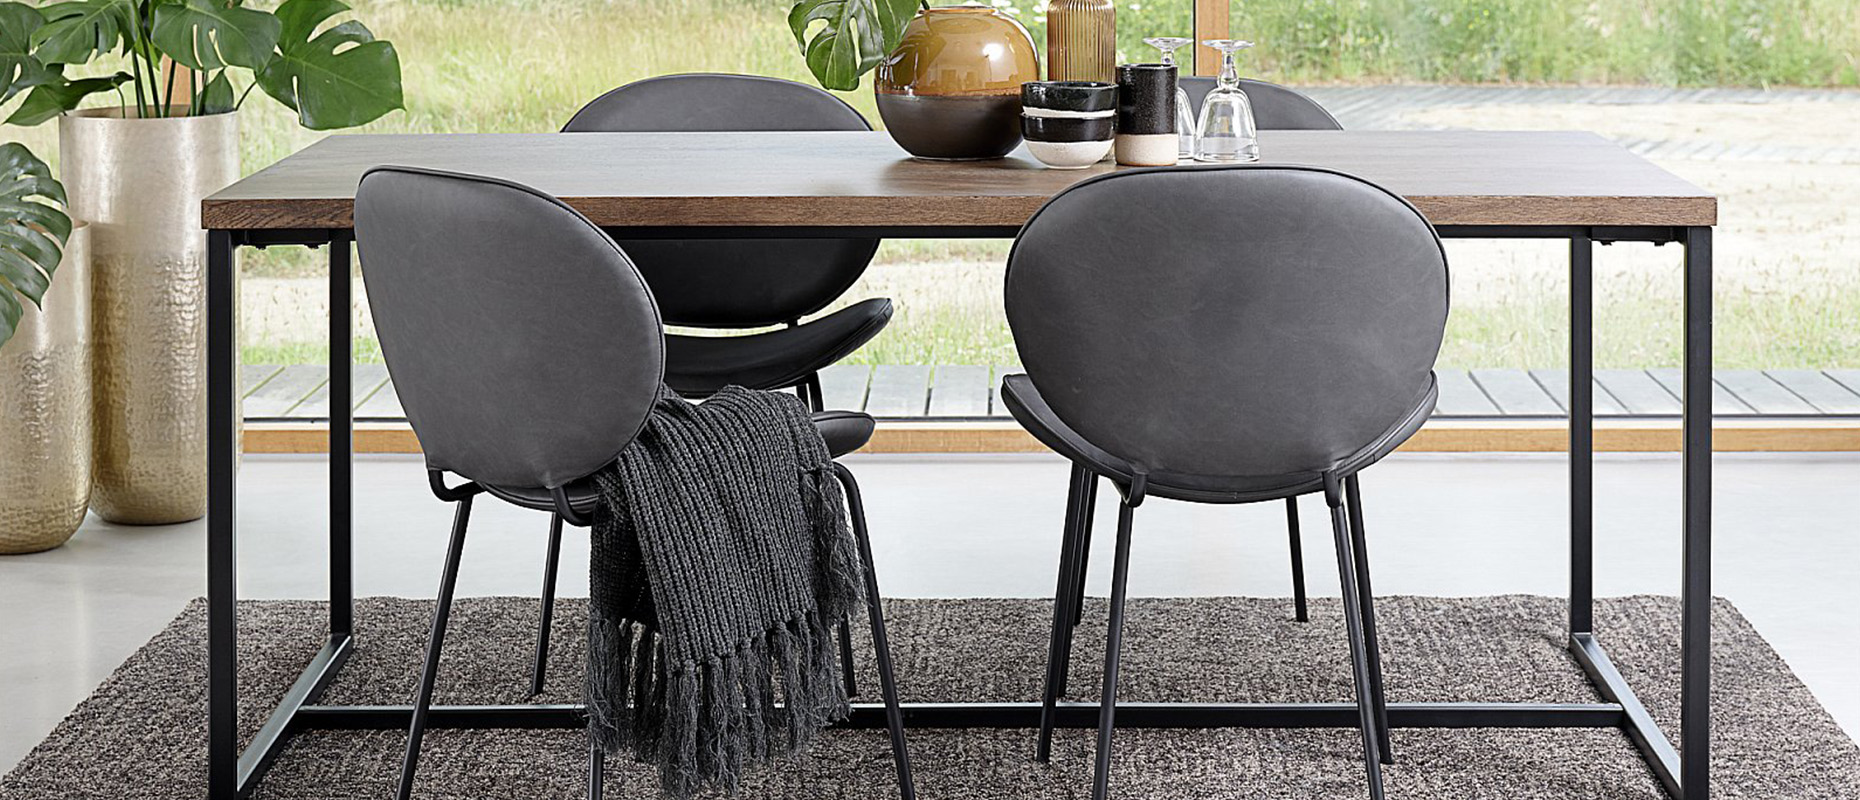 Kansas dining collection at Forrest Furnishing